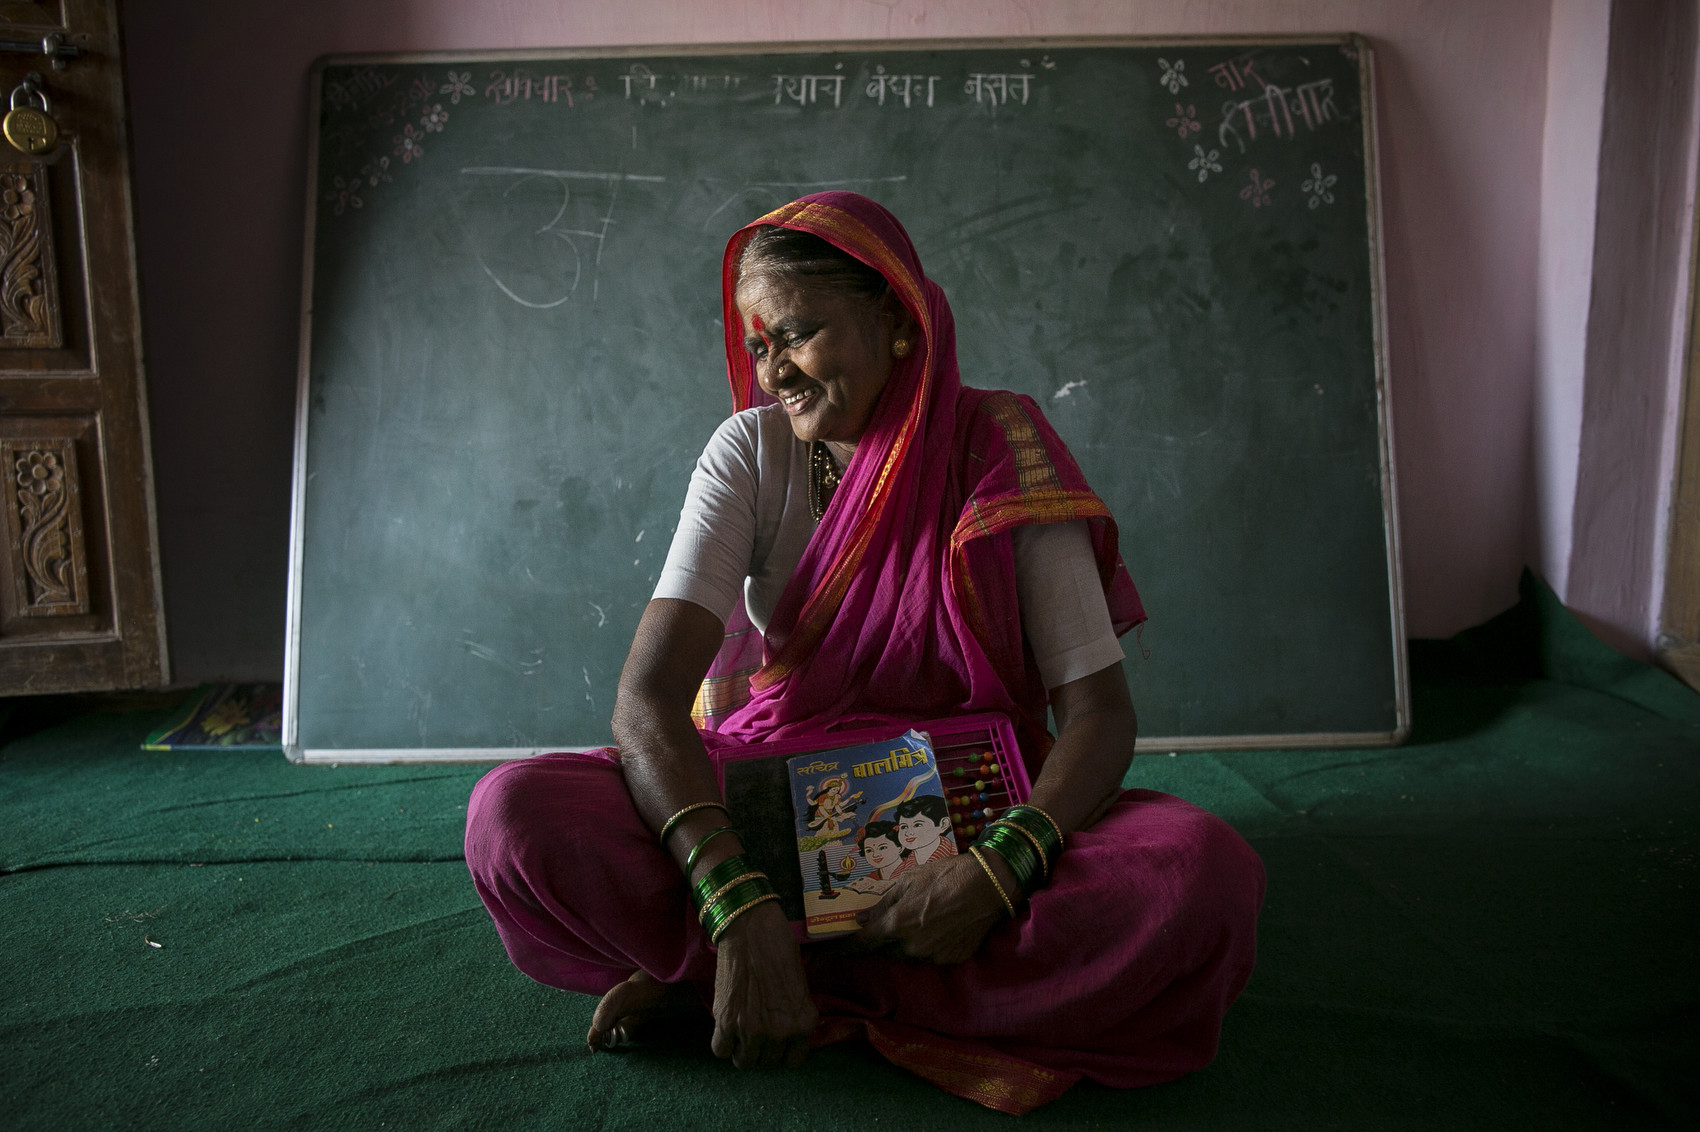 70 year old Nirmalabai Sakaram Kedar poses for a photo in her school. She was married at the age of 9, to a 25 year old man, and was sent to live with him when she turned 16. and never had the opportunity to go to school until now.There are 30 elderly women between 60 and 90 years old who are going to school for the first time in their life at the Aajibaichi Shala or the Grandmothers’ School, in Phangane village of Thane district, India. Most of them were deprived of a formal education as a child. Their families were either too poor to afford their education or they simply thought “it was sheer waste of time and money to invest in a girl child’s studies”. The common perception was that the girls, many of whom would be married off while they were underage, were destined to do the household chores only. The school, which started on the International Women’s Day this March, aims to empower the elderly women and break the stereotypes.